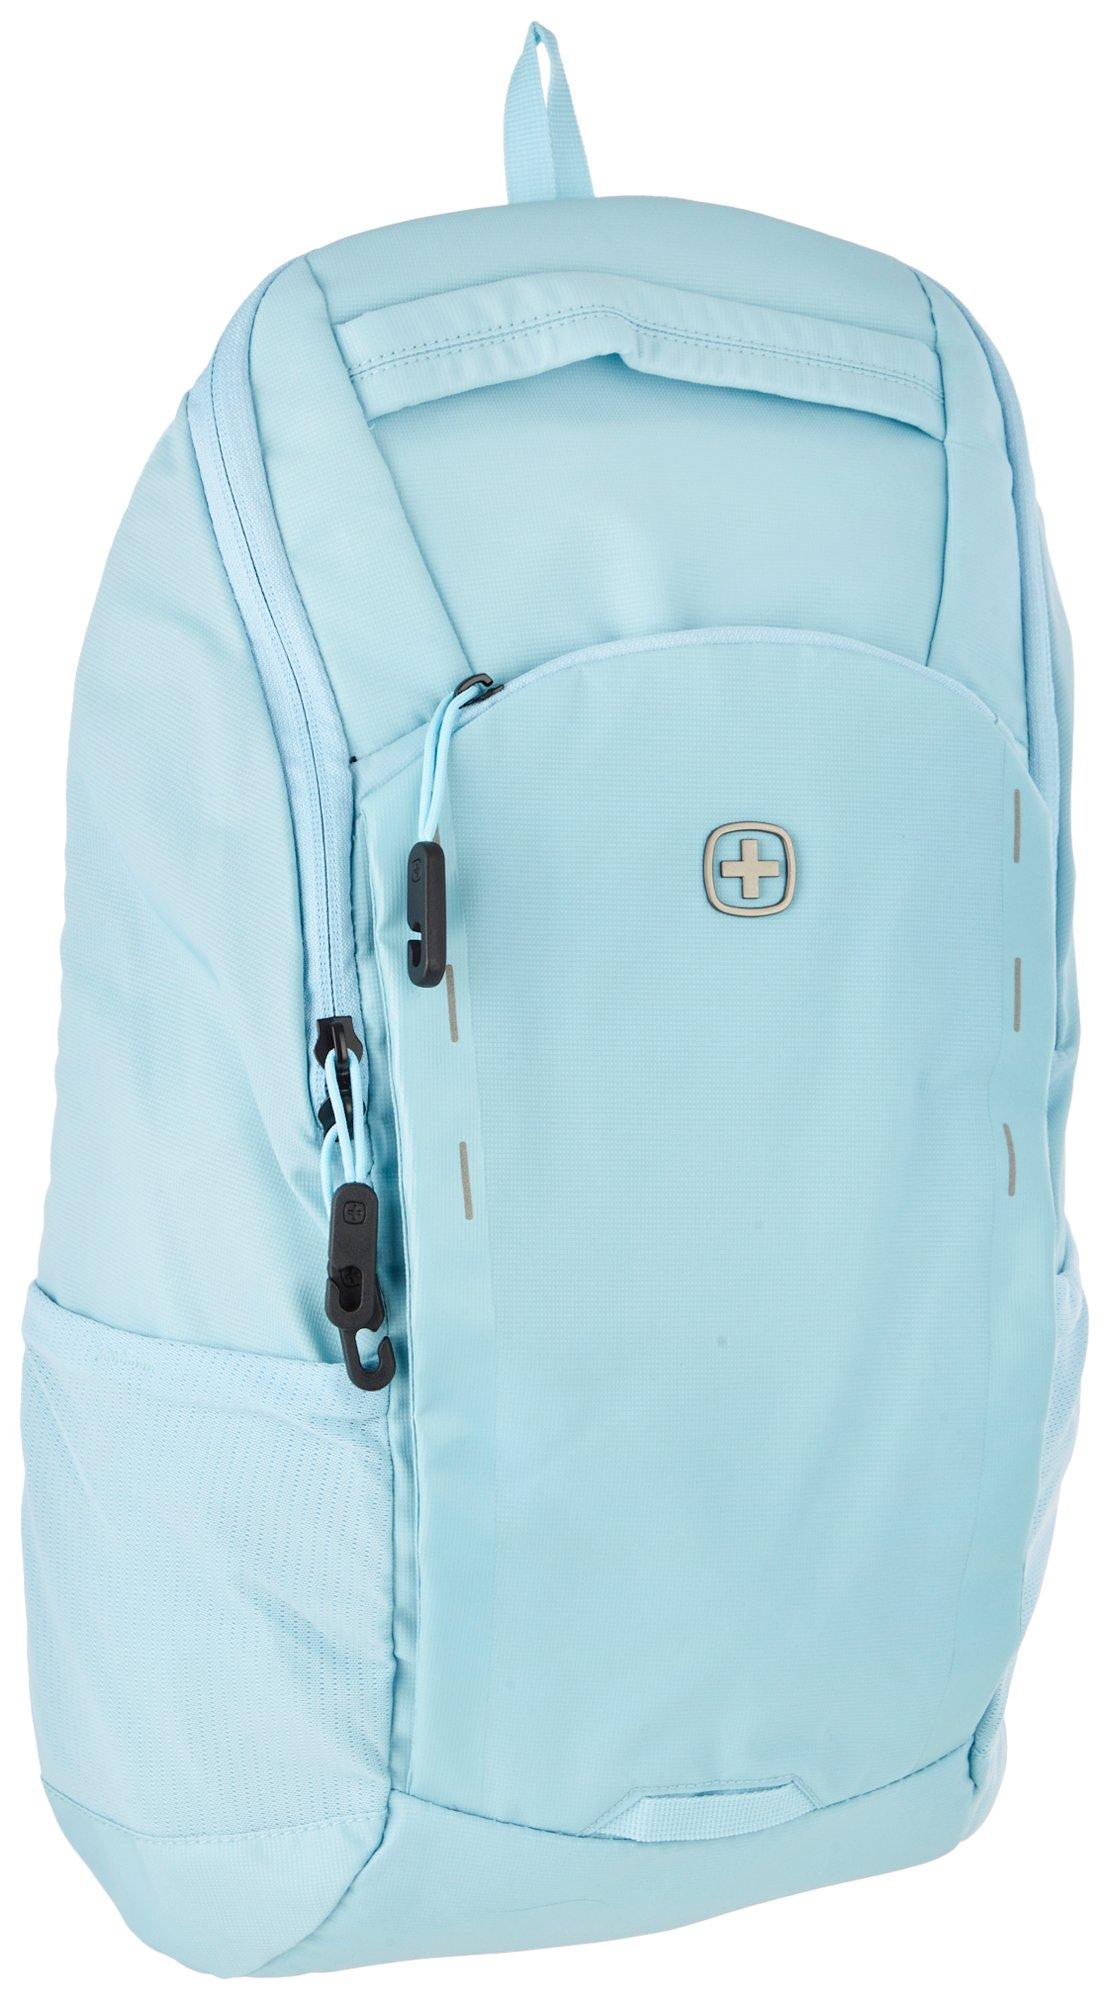 8117 15in Laptop Backpack